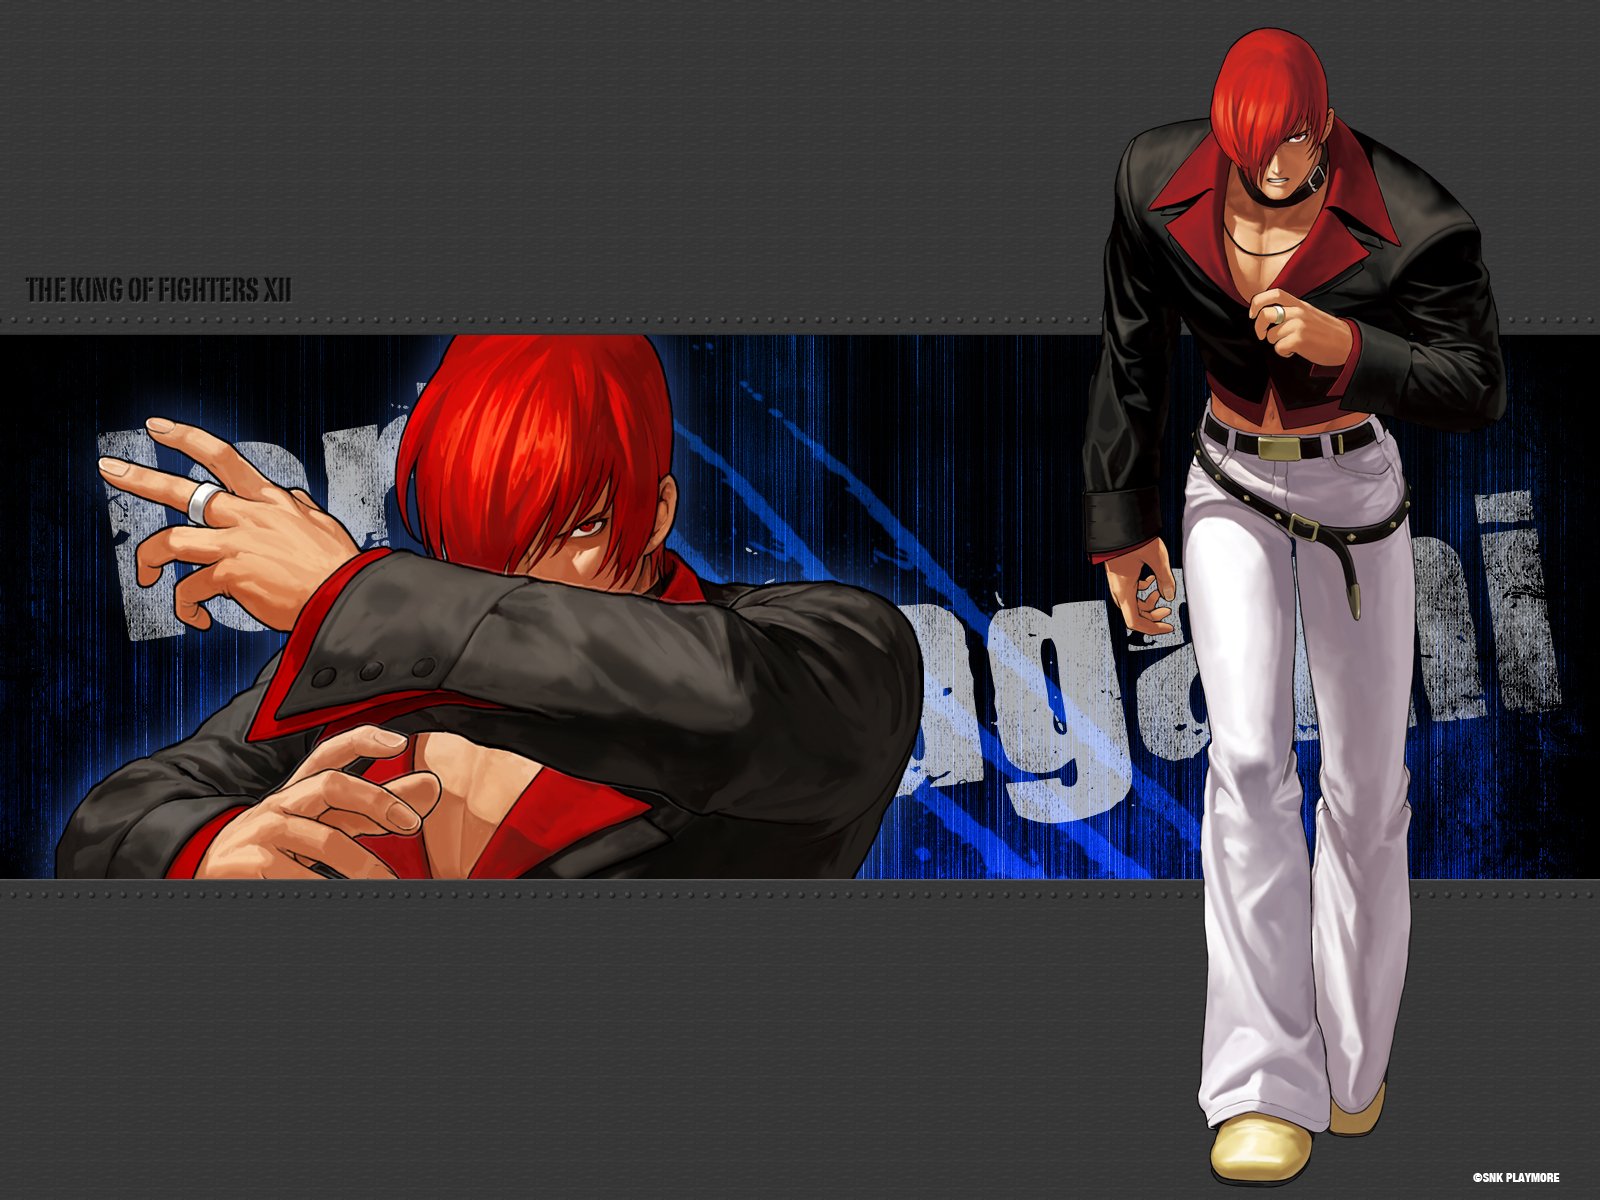 Wallpapers de The King of Fighters   Taringa 1600x1200